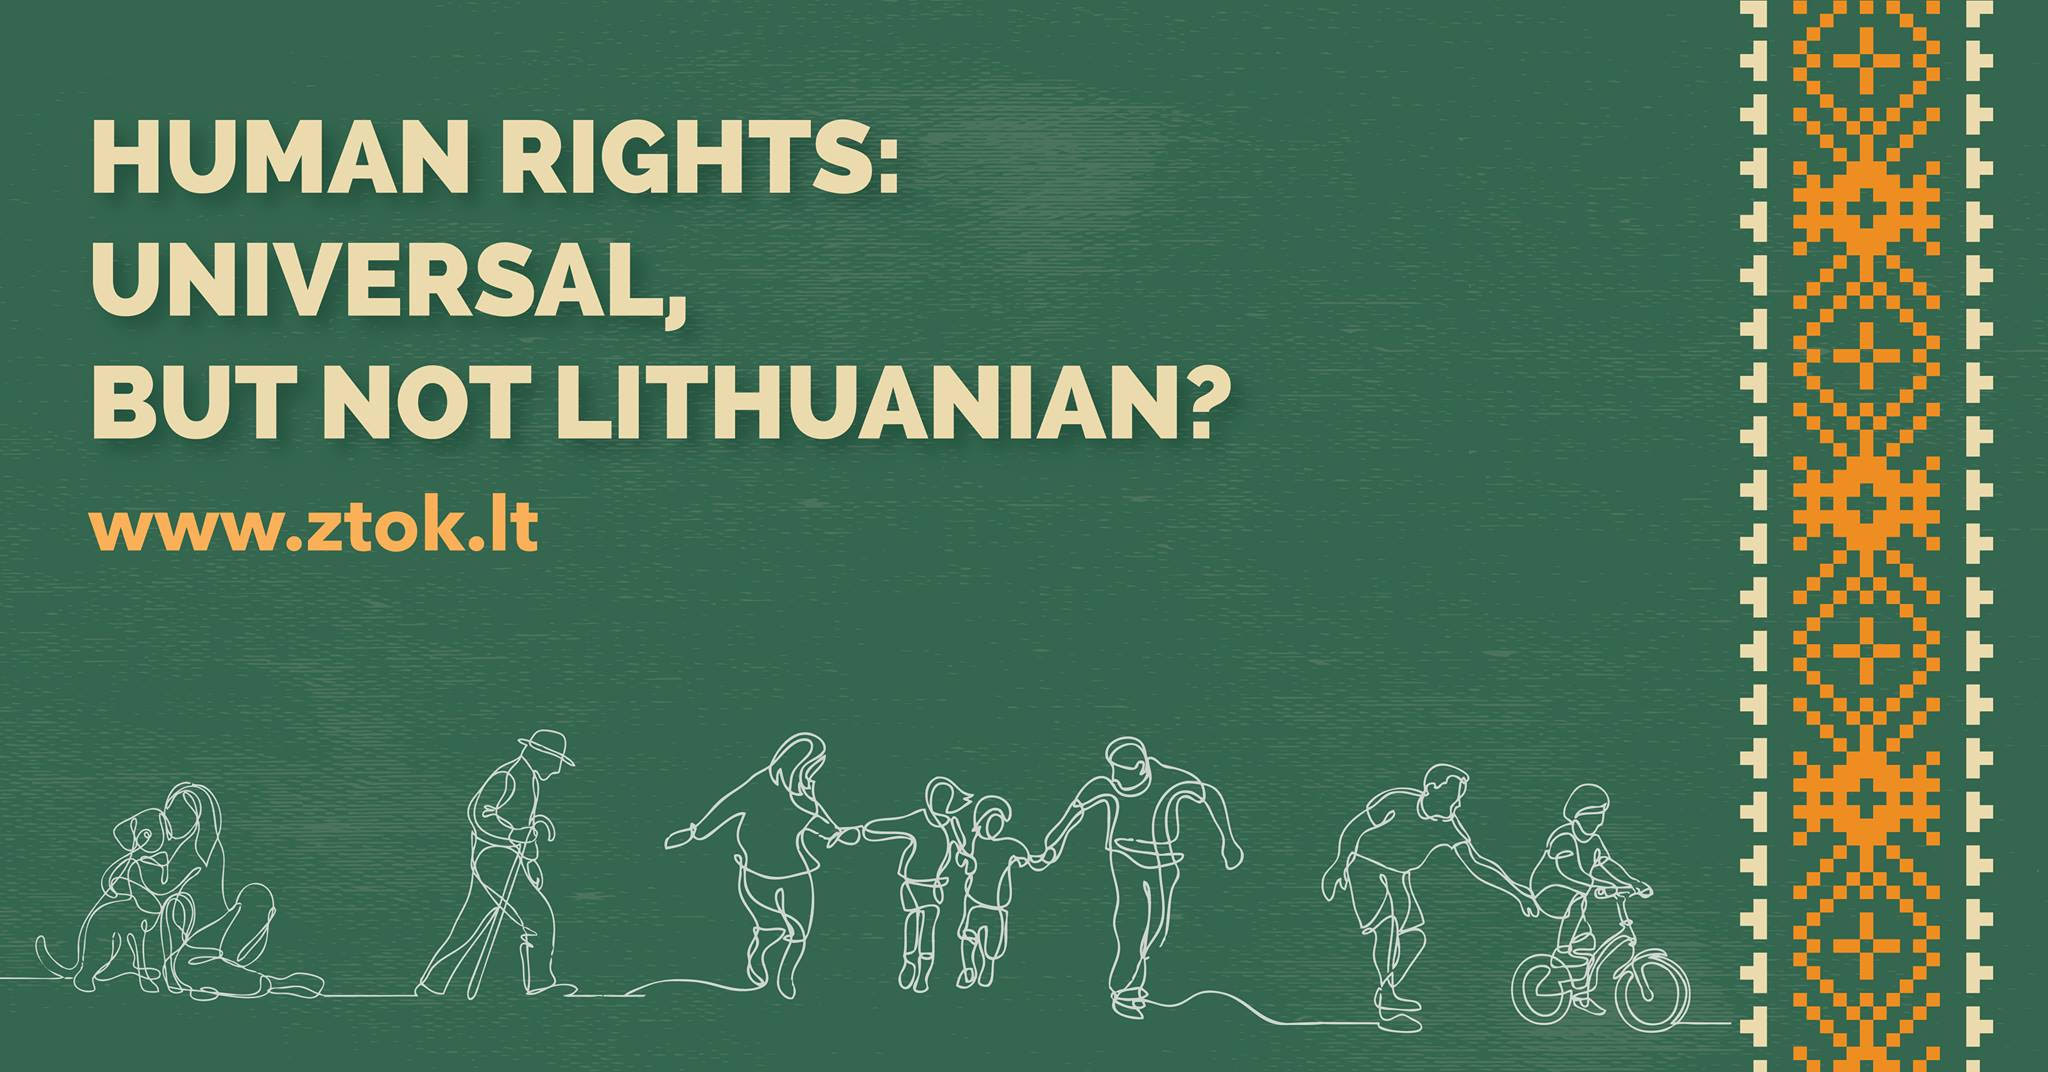 Seminar-Discussion “Human Rights: Universal, but not Lithuanian?“